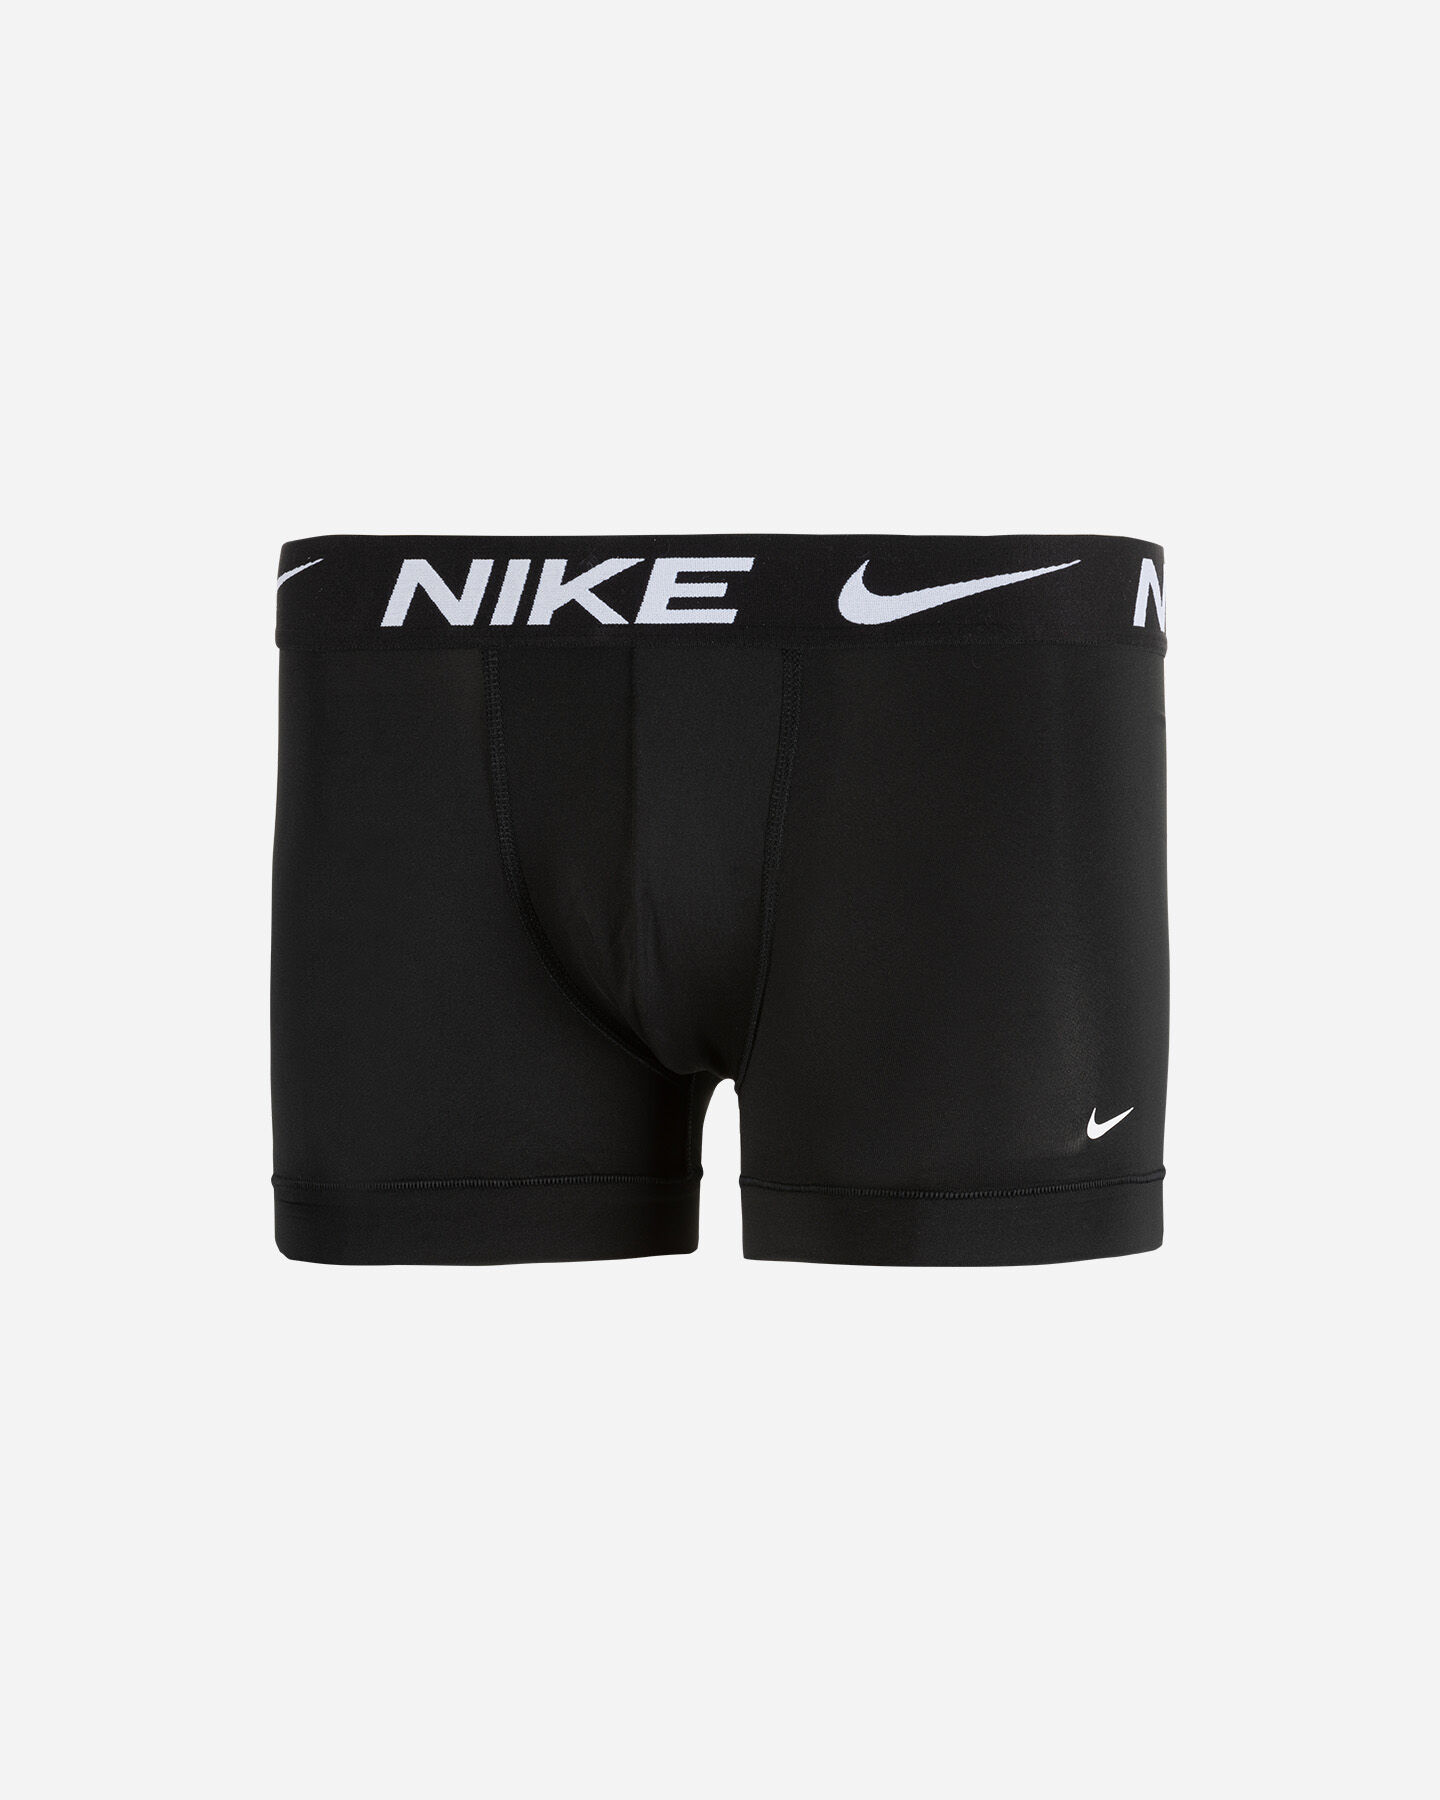  Intimo NIKE 3 PACK BOXER DRI-FIT M S4110507|1M5|S scatto 1